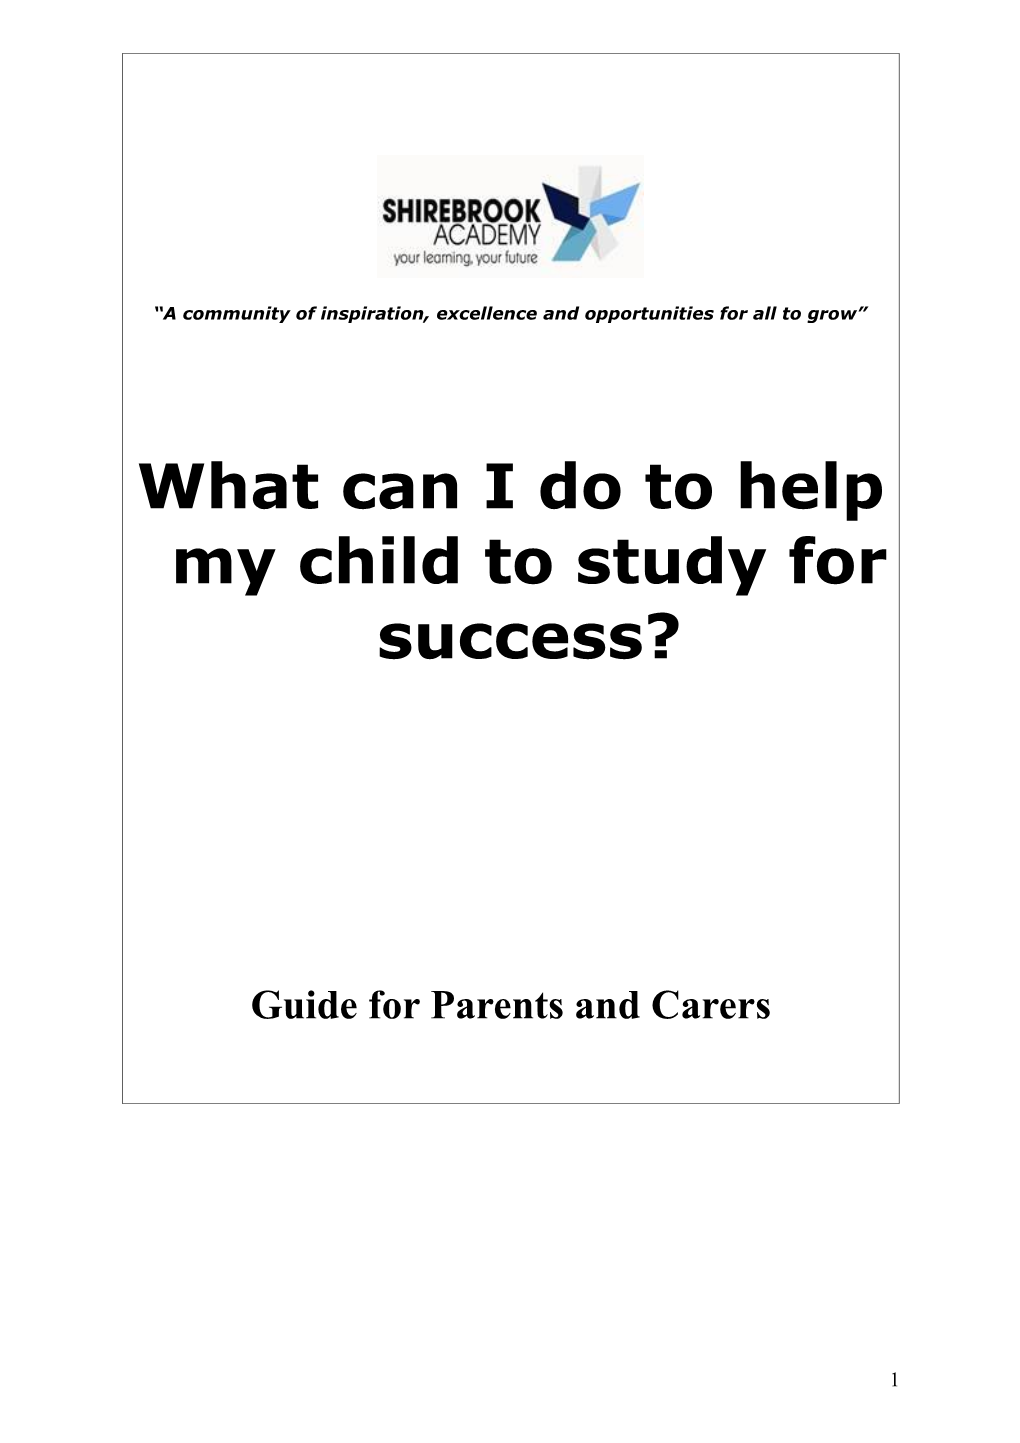 What Can I Do to Help My Child with Revision